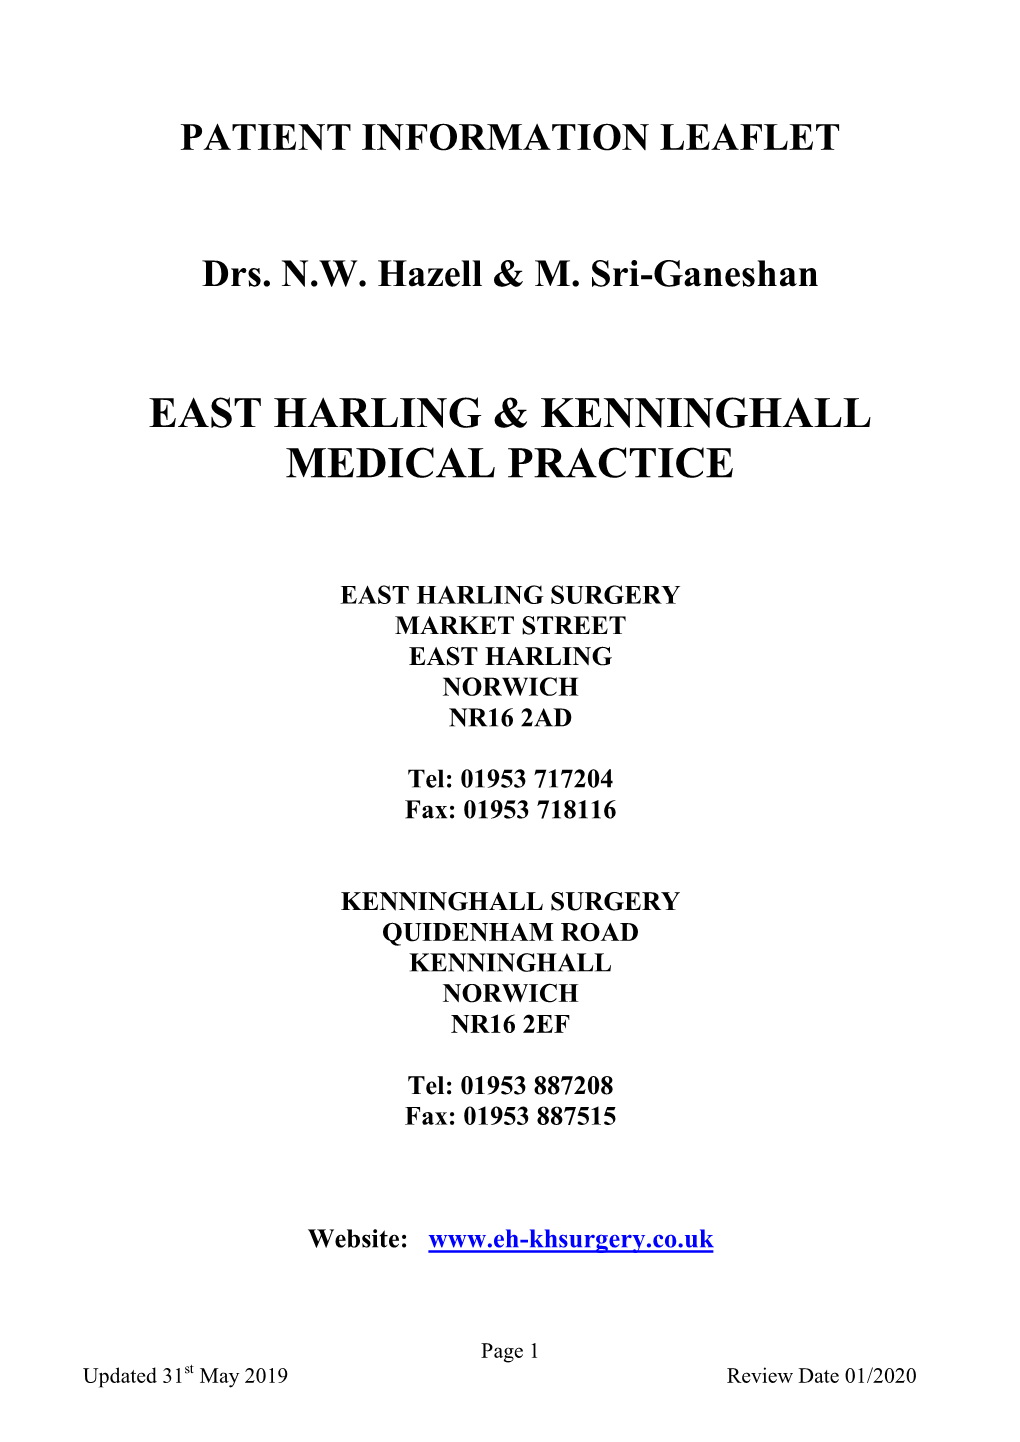 East Harling & Kenninghall Medical Practice